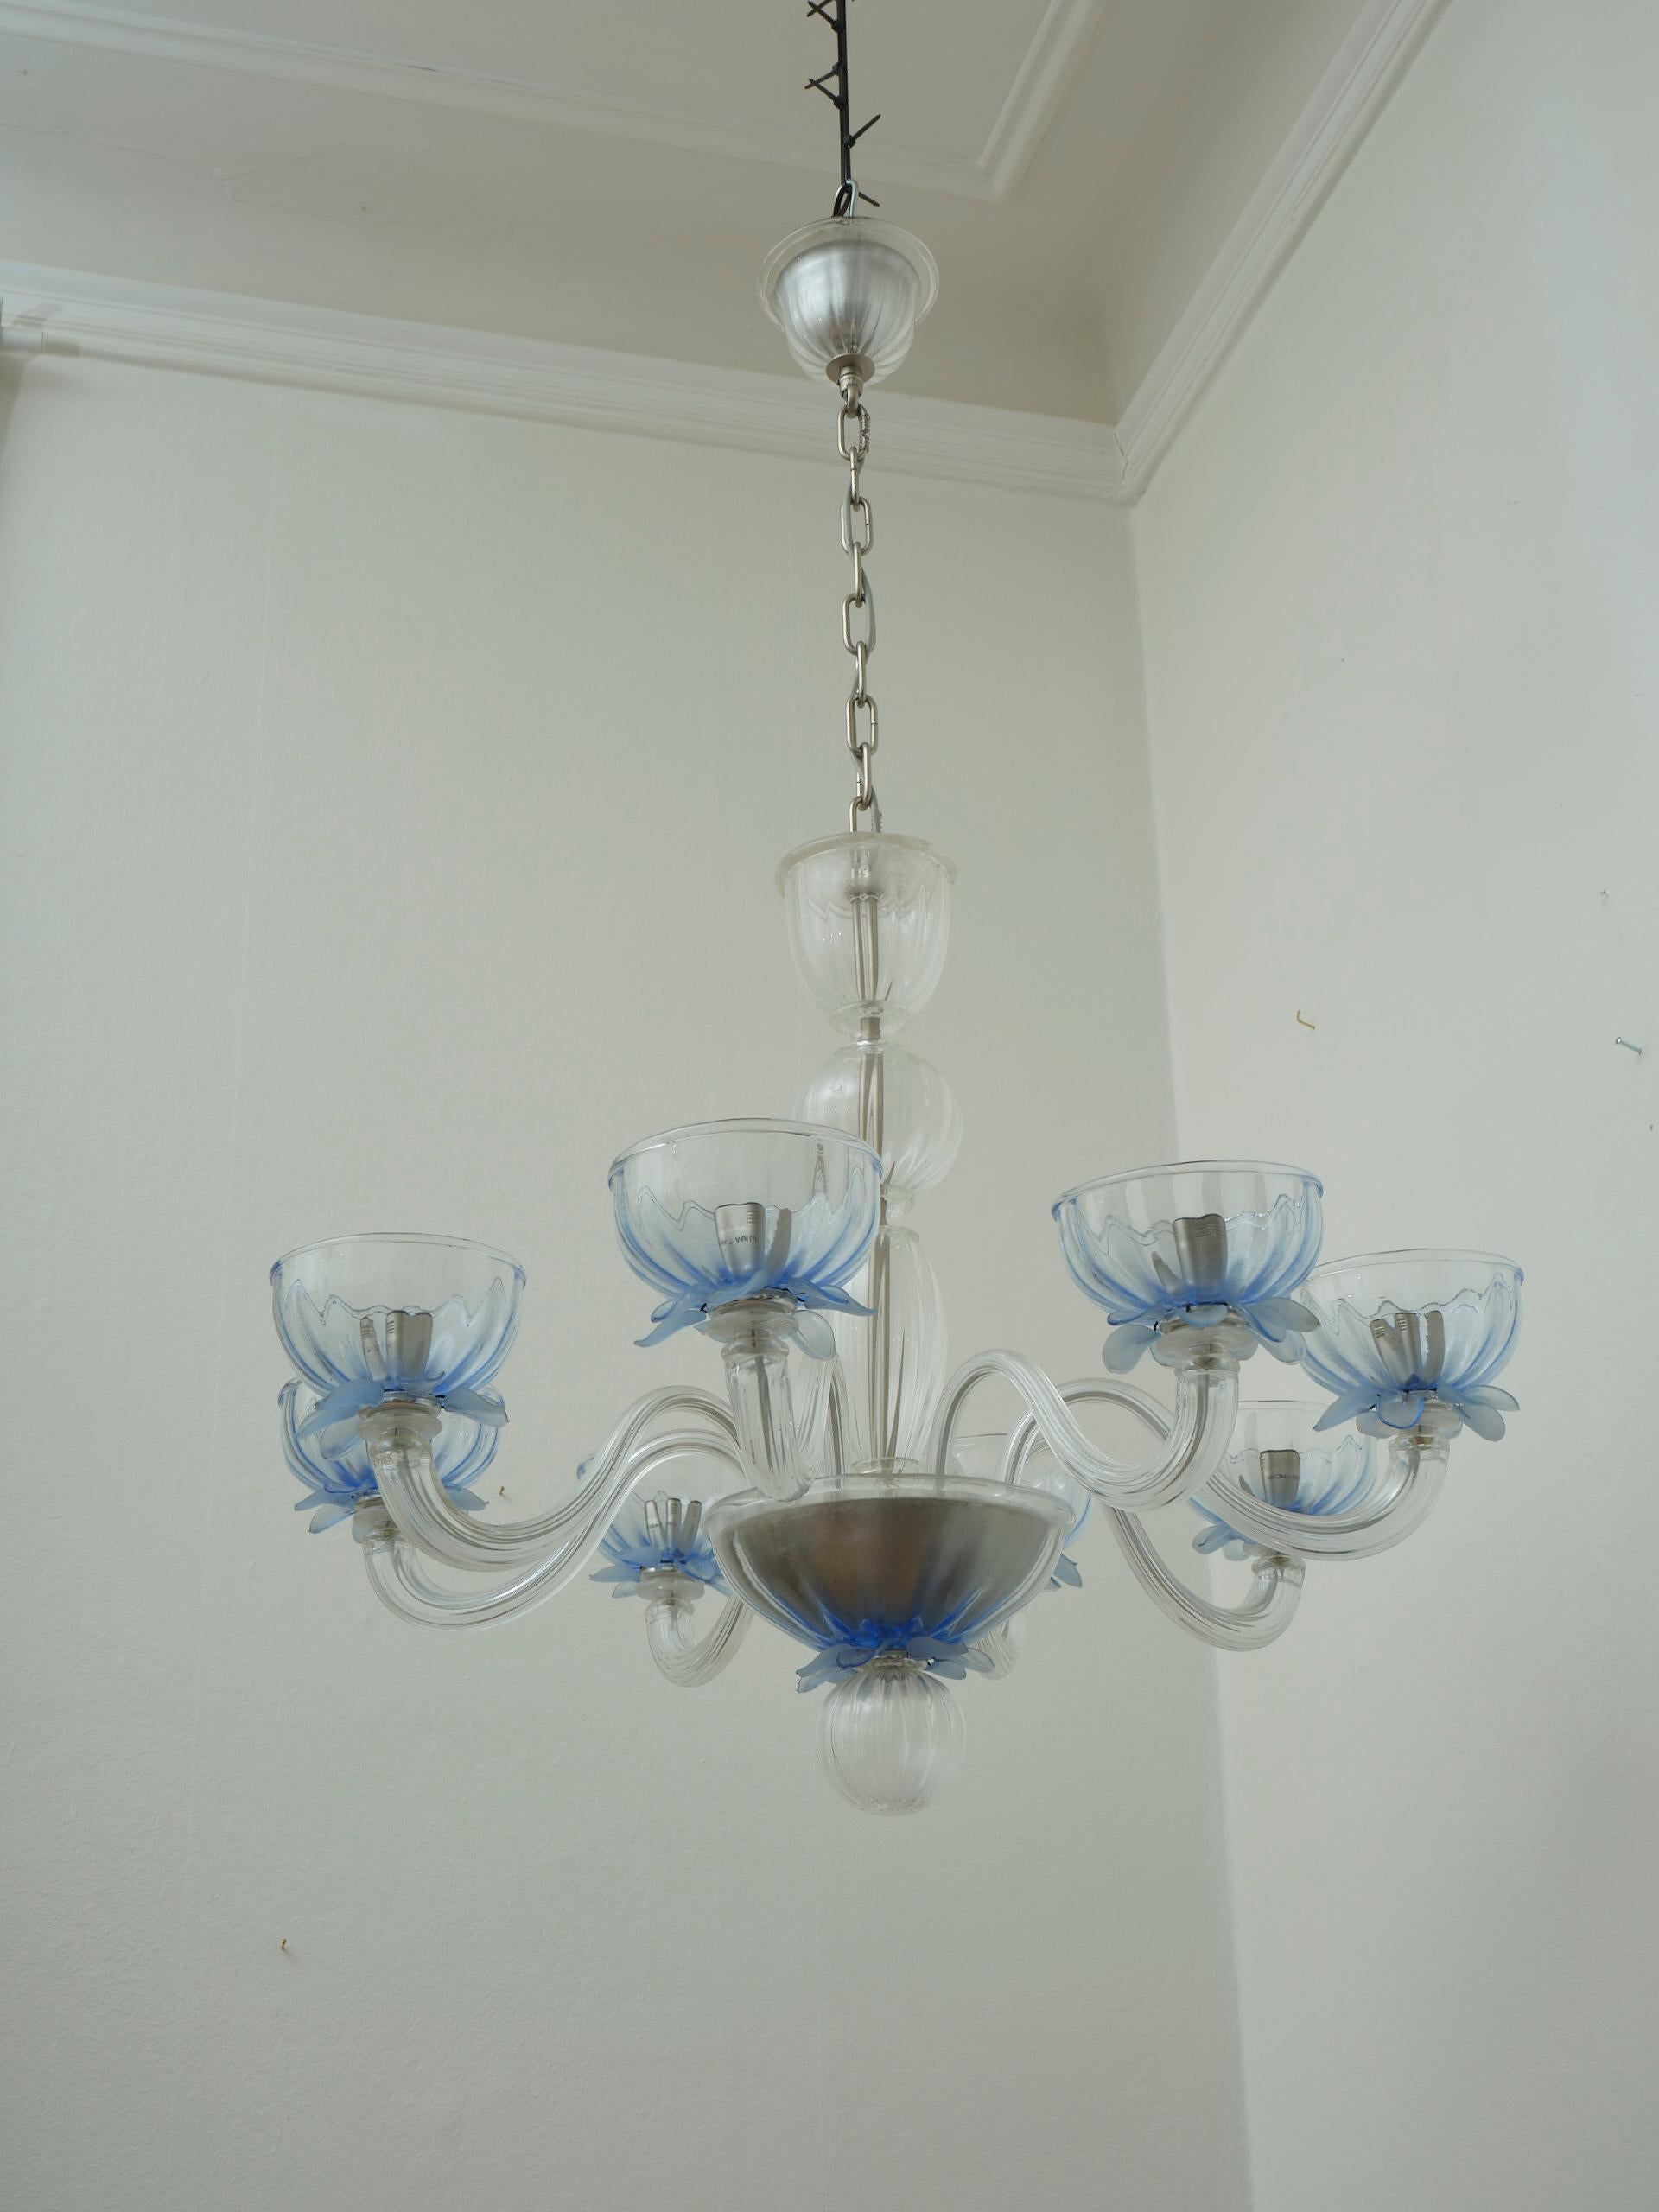 Giant vintage European glass chandelier 8 arms blue details in the style of Murano. Creator unknown, but in the style of Murano and Organic Modern. Really decorative in clear glass with 8 arms and petal details in frosted and clear blue. 

This